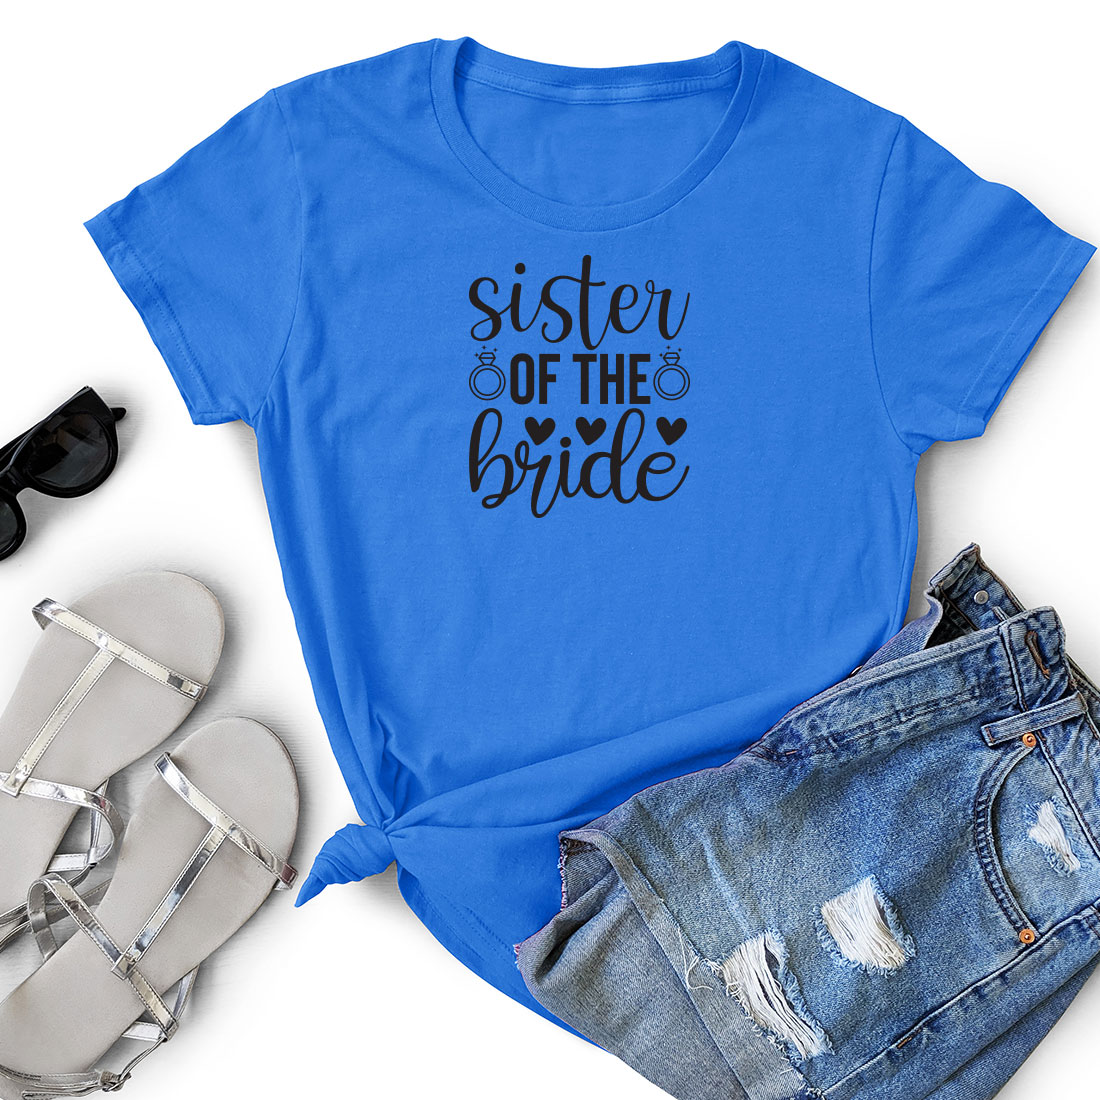 Blue shirt that says sister of the bride.